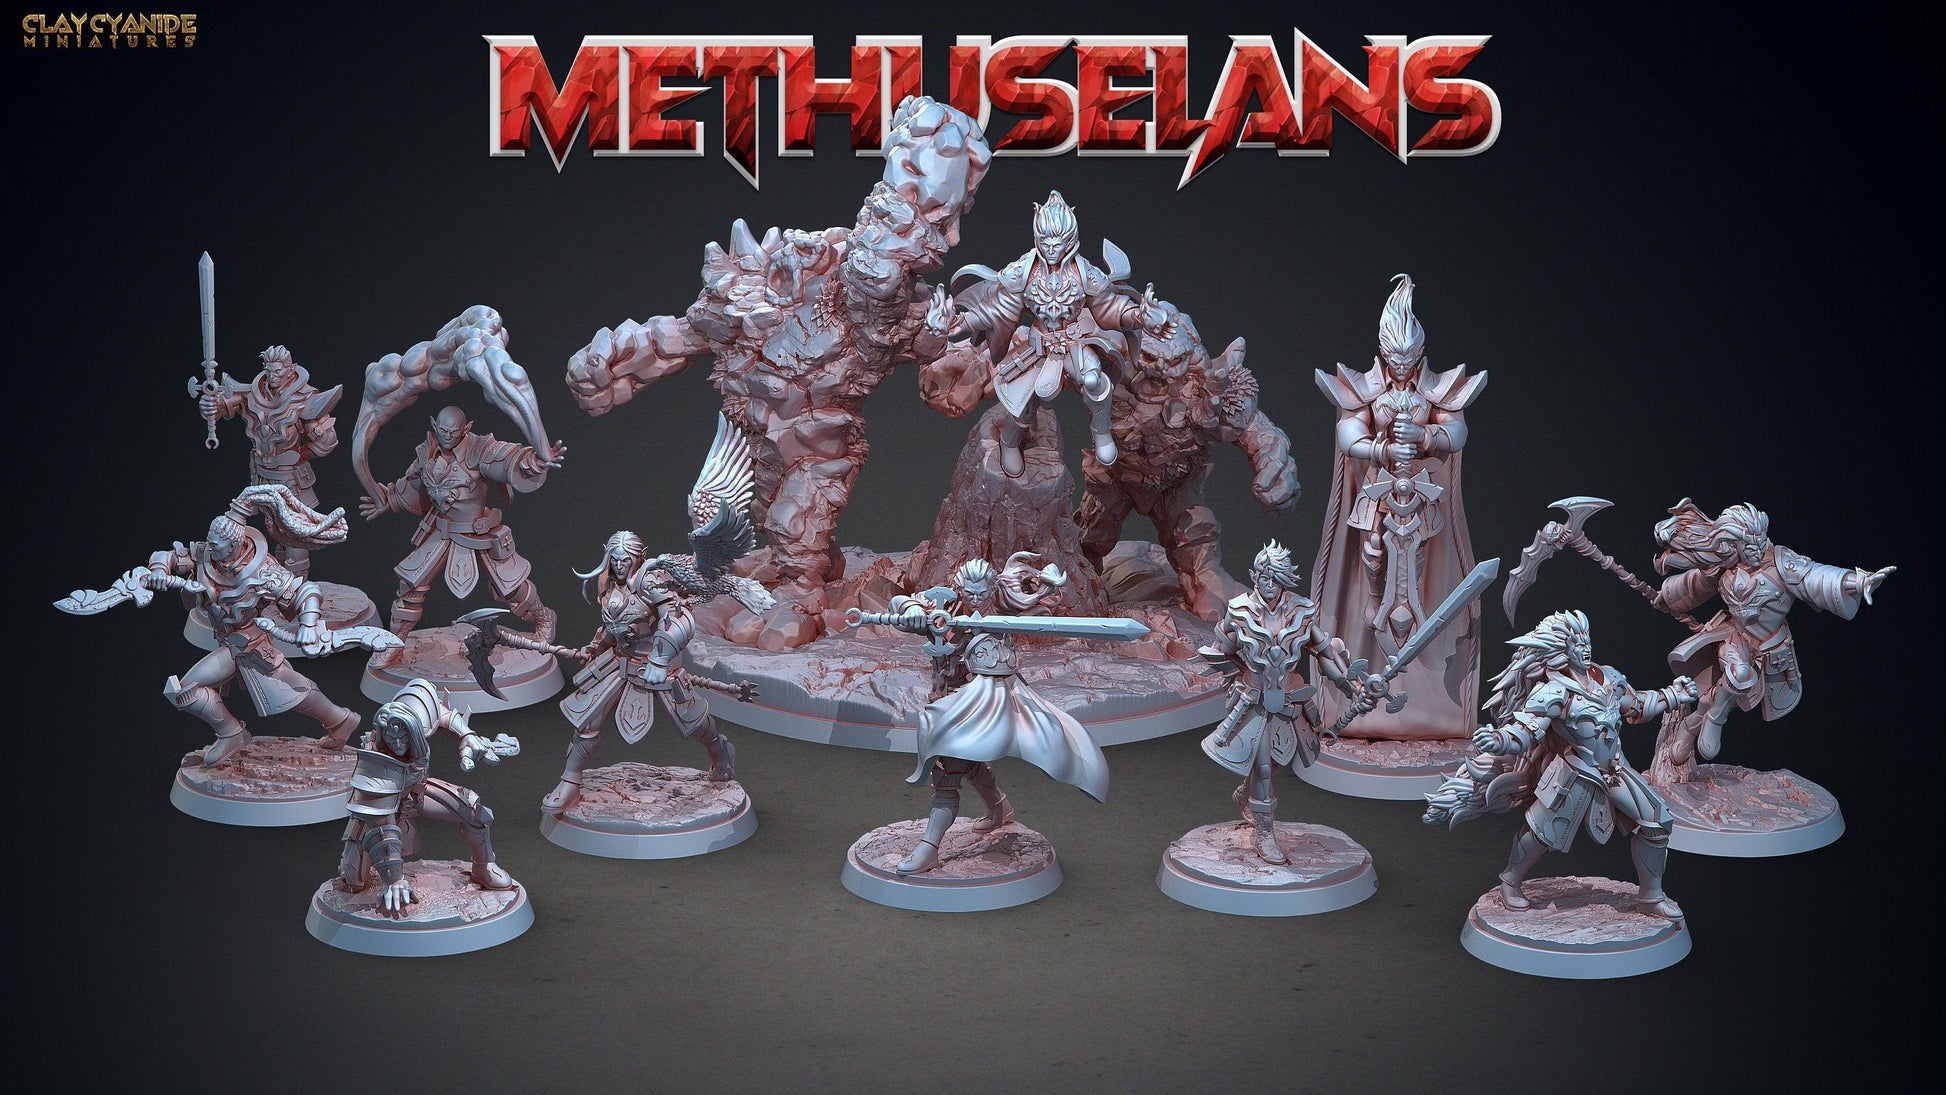 Barath vampire miniature | Clay Cyanide | Methuselans | Tabletop Gaming | DnD Miniature | Dungeons and Dragons , DnD 5e - Plague Miniatures shop for DnD Miniatures